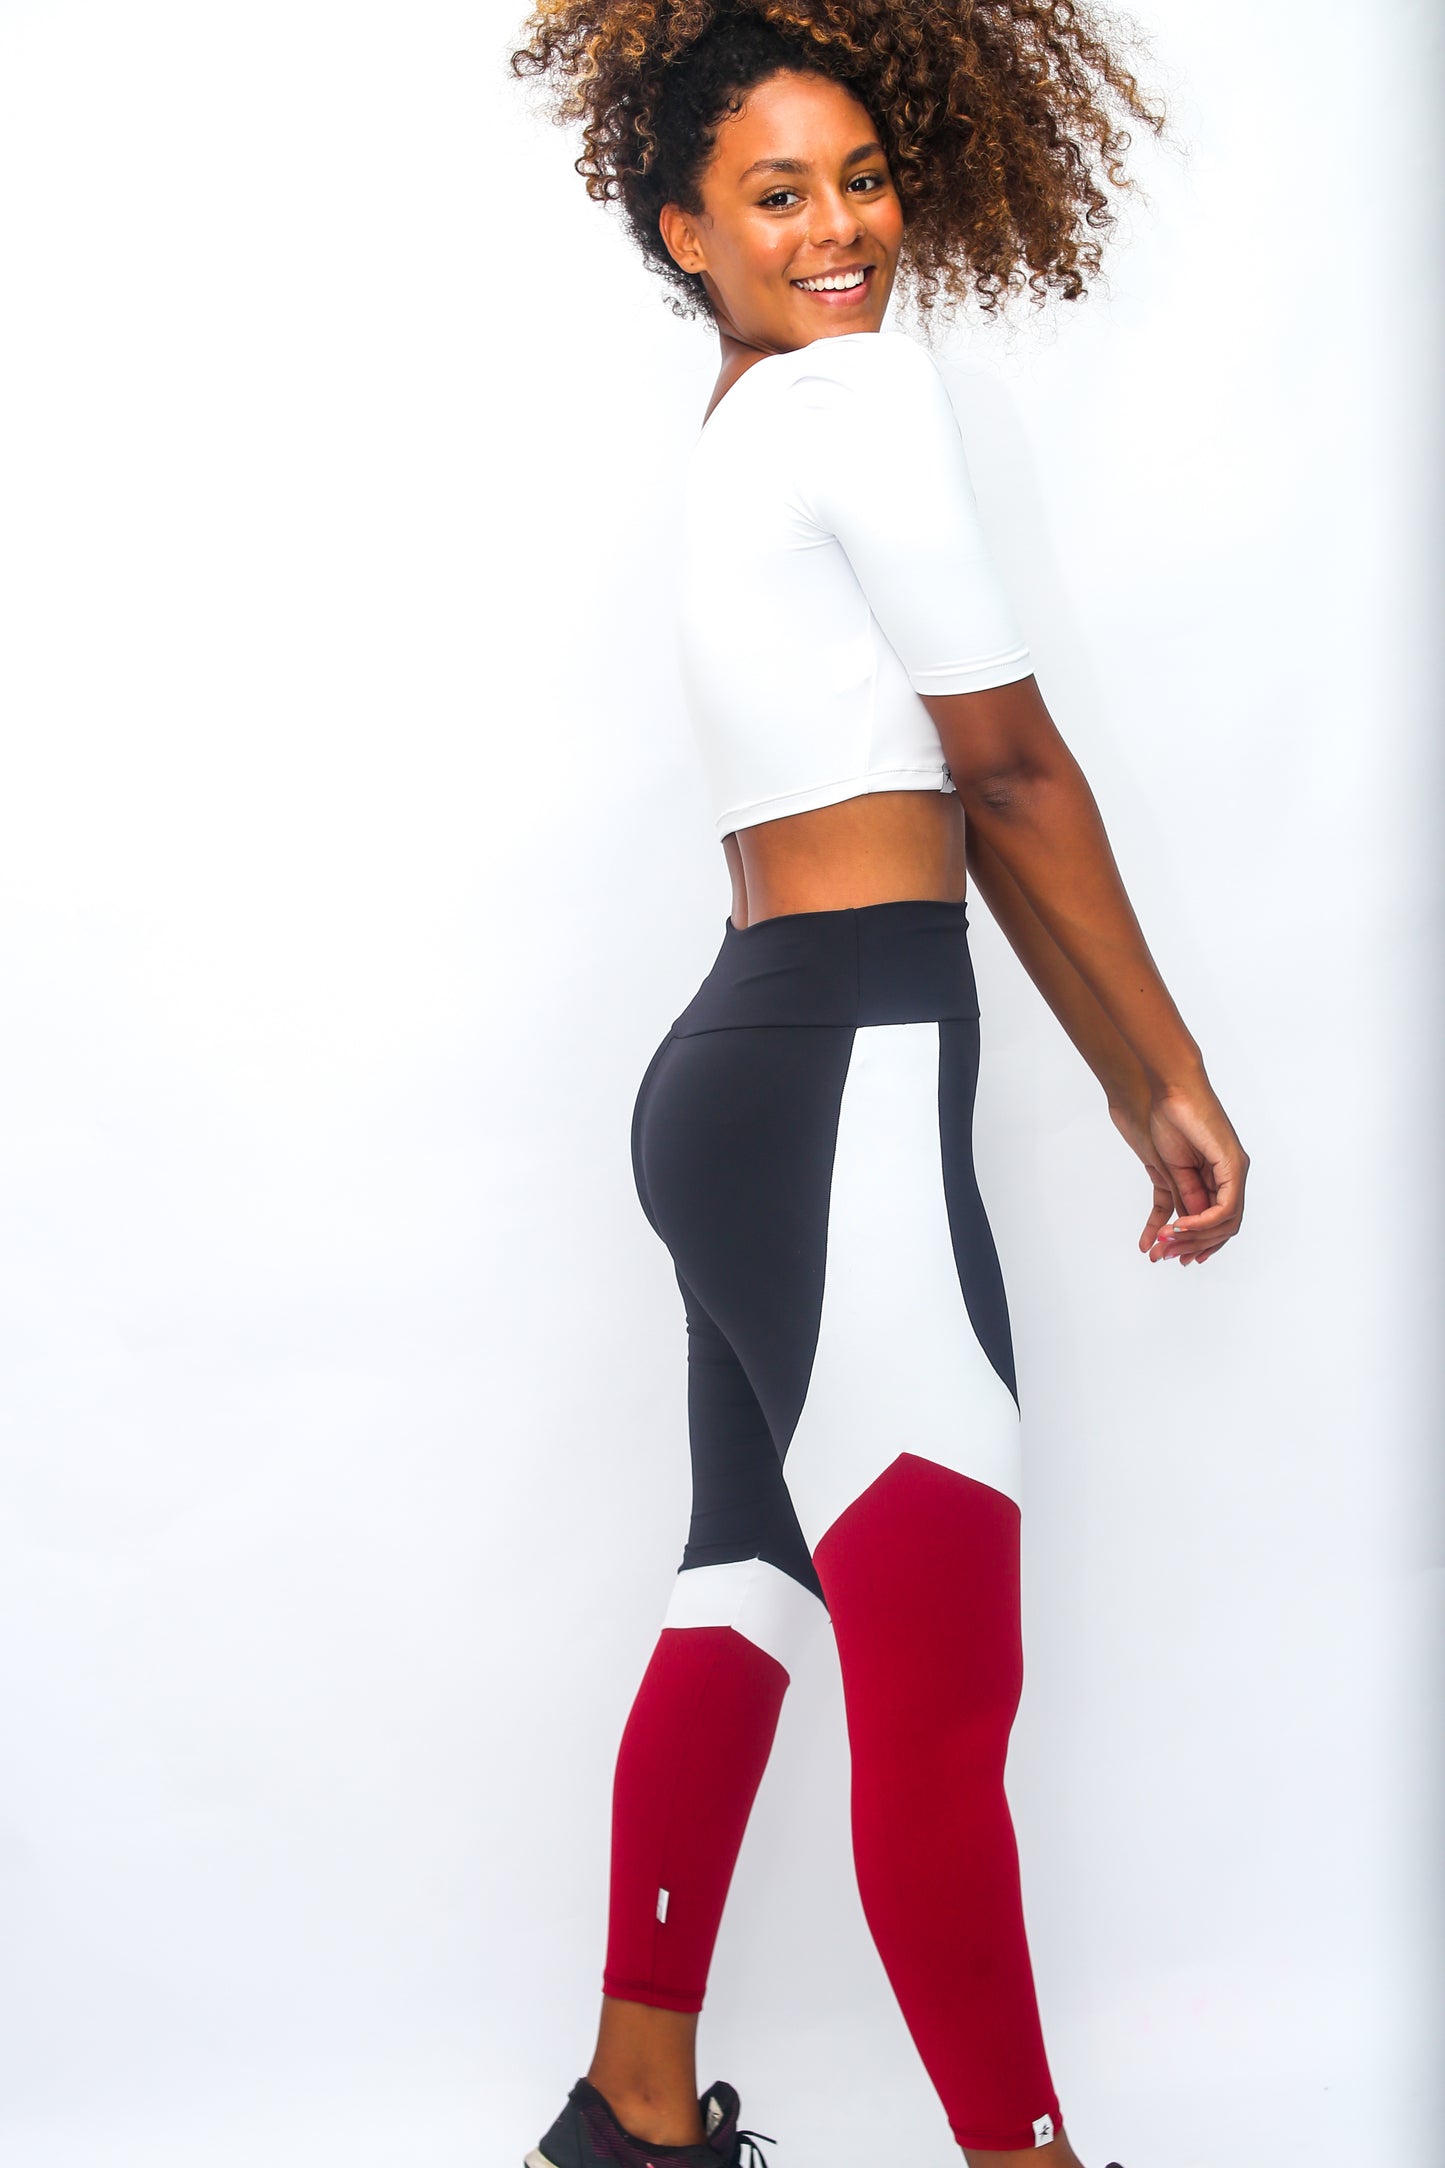 Classic Lines Tri-Colors Black Red and White Leggings with Pocket - Emana Fabric